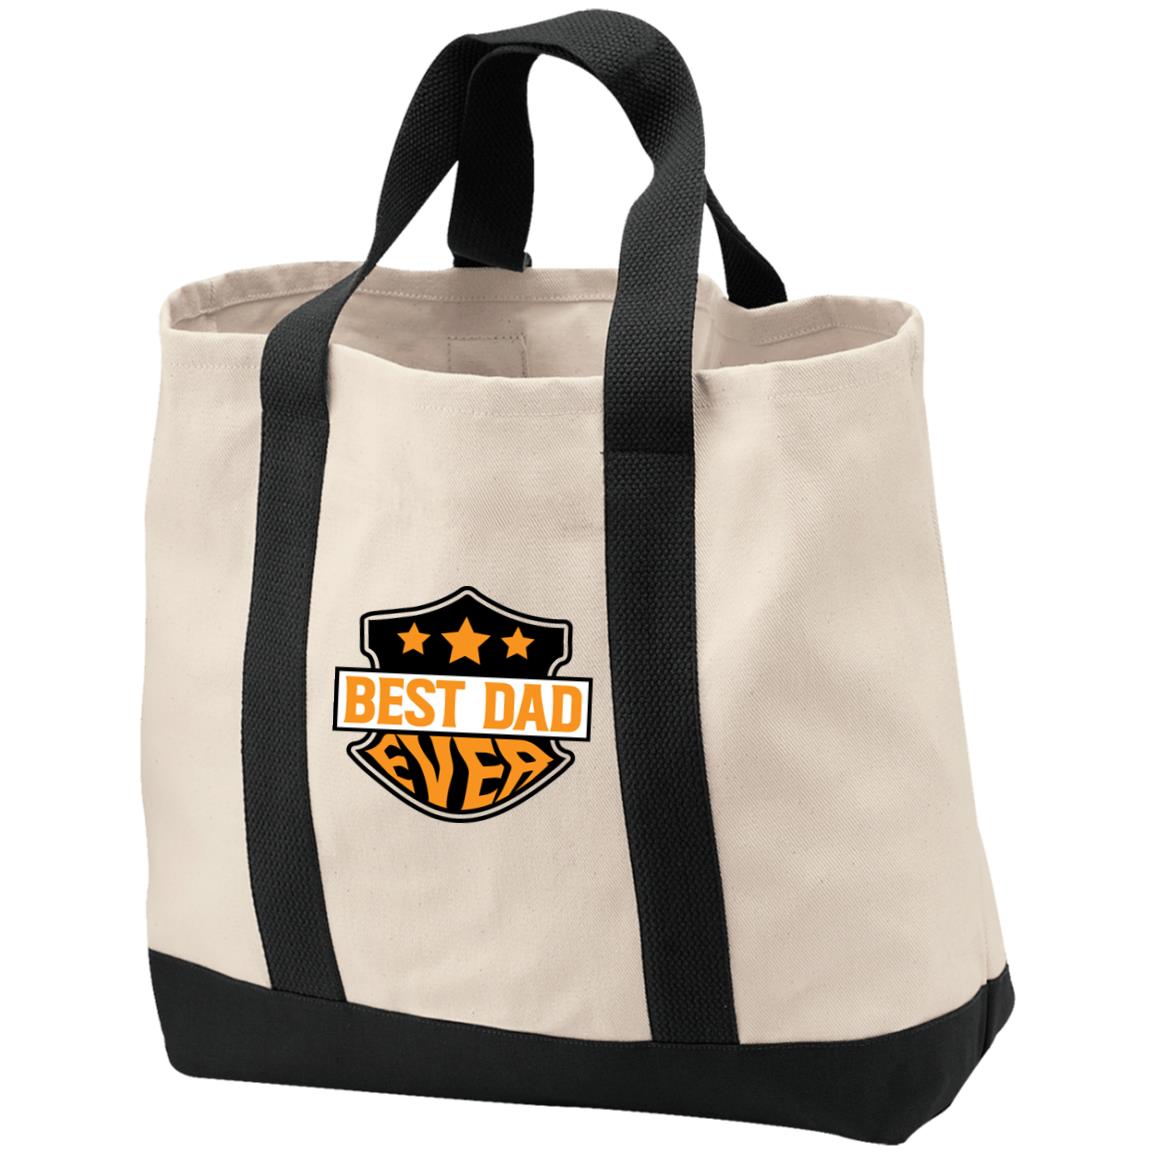 Best Dad Ever (Org) -2 Tone Shopping Tote